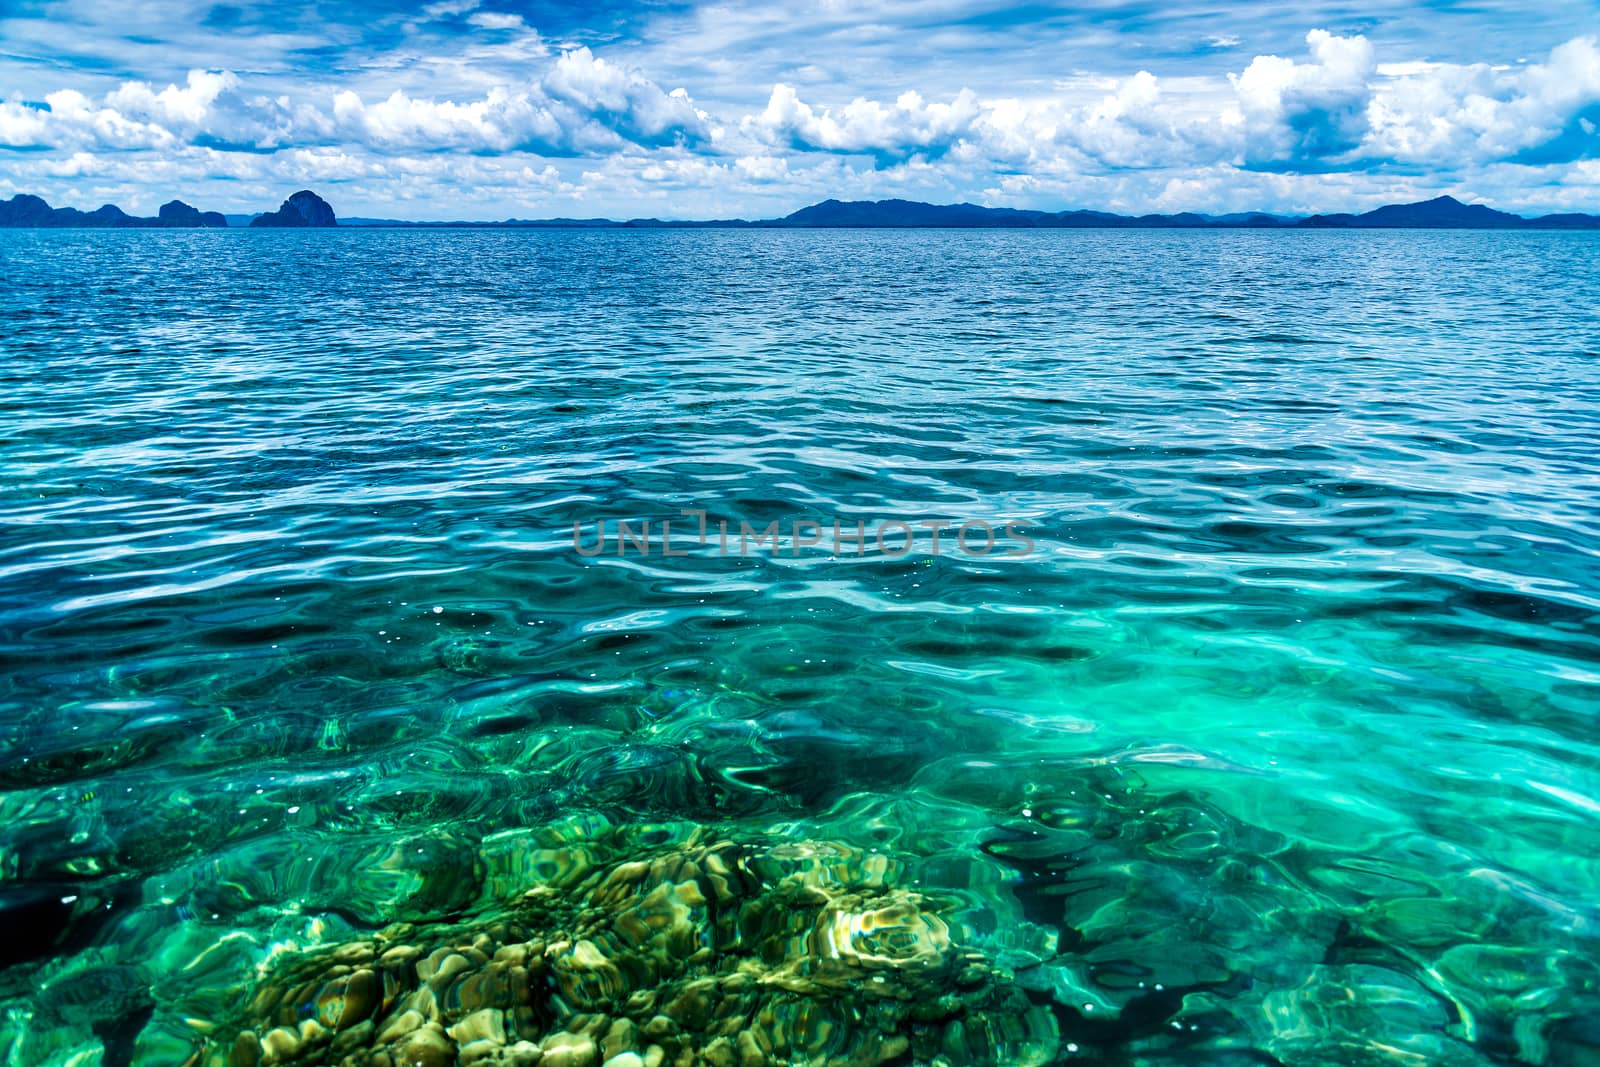 Landscape of sea in the Andaman Sea, Thailand by jakgree